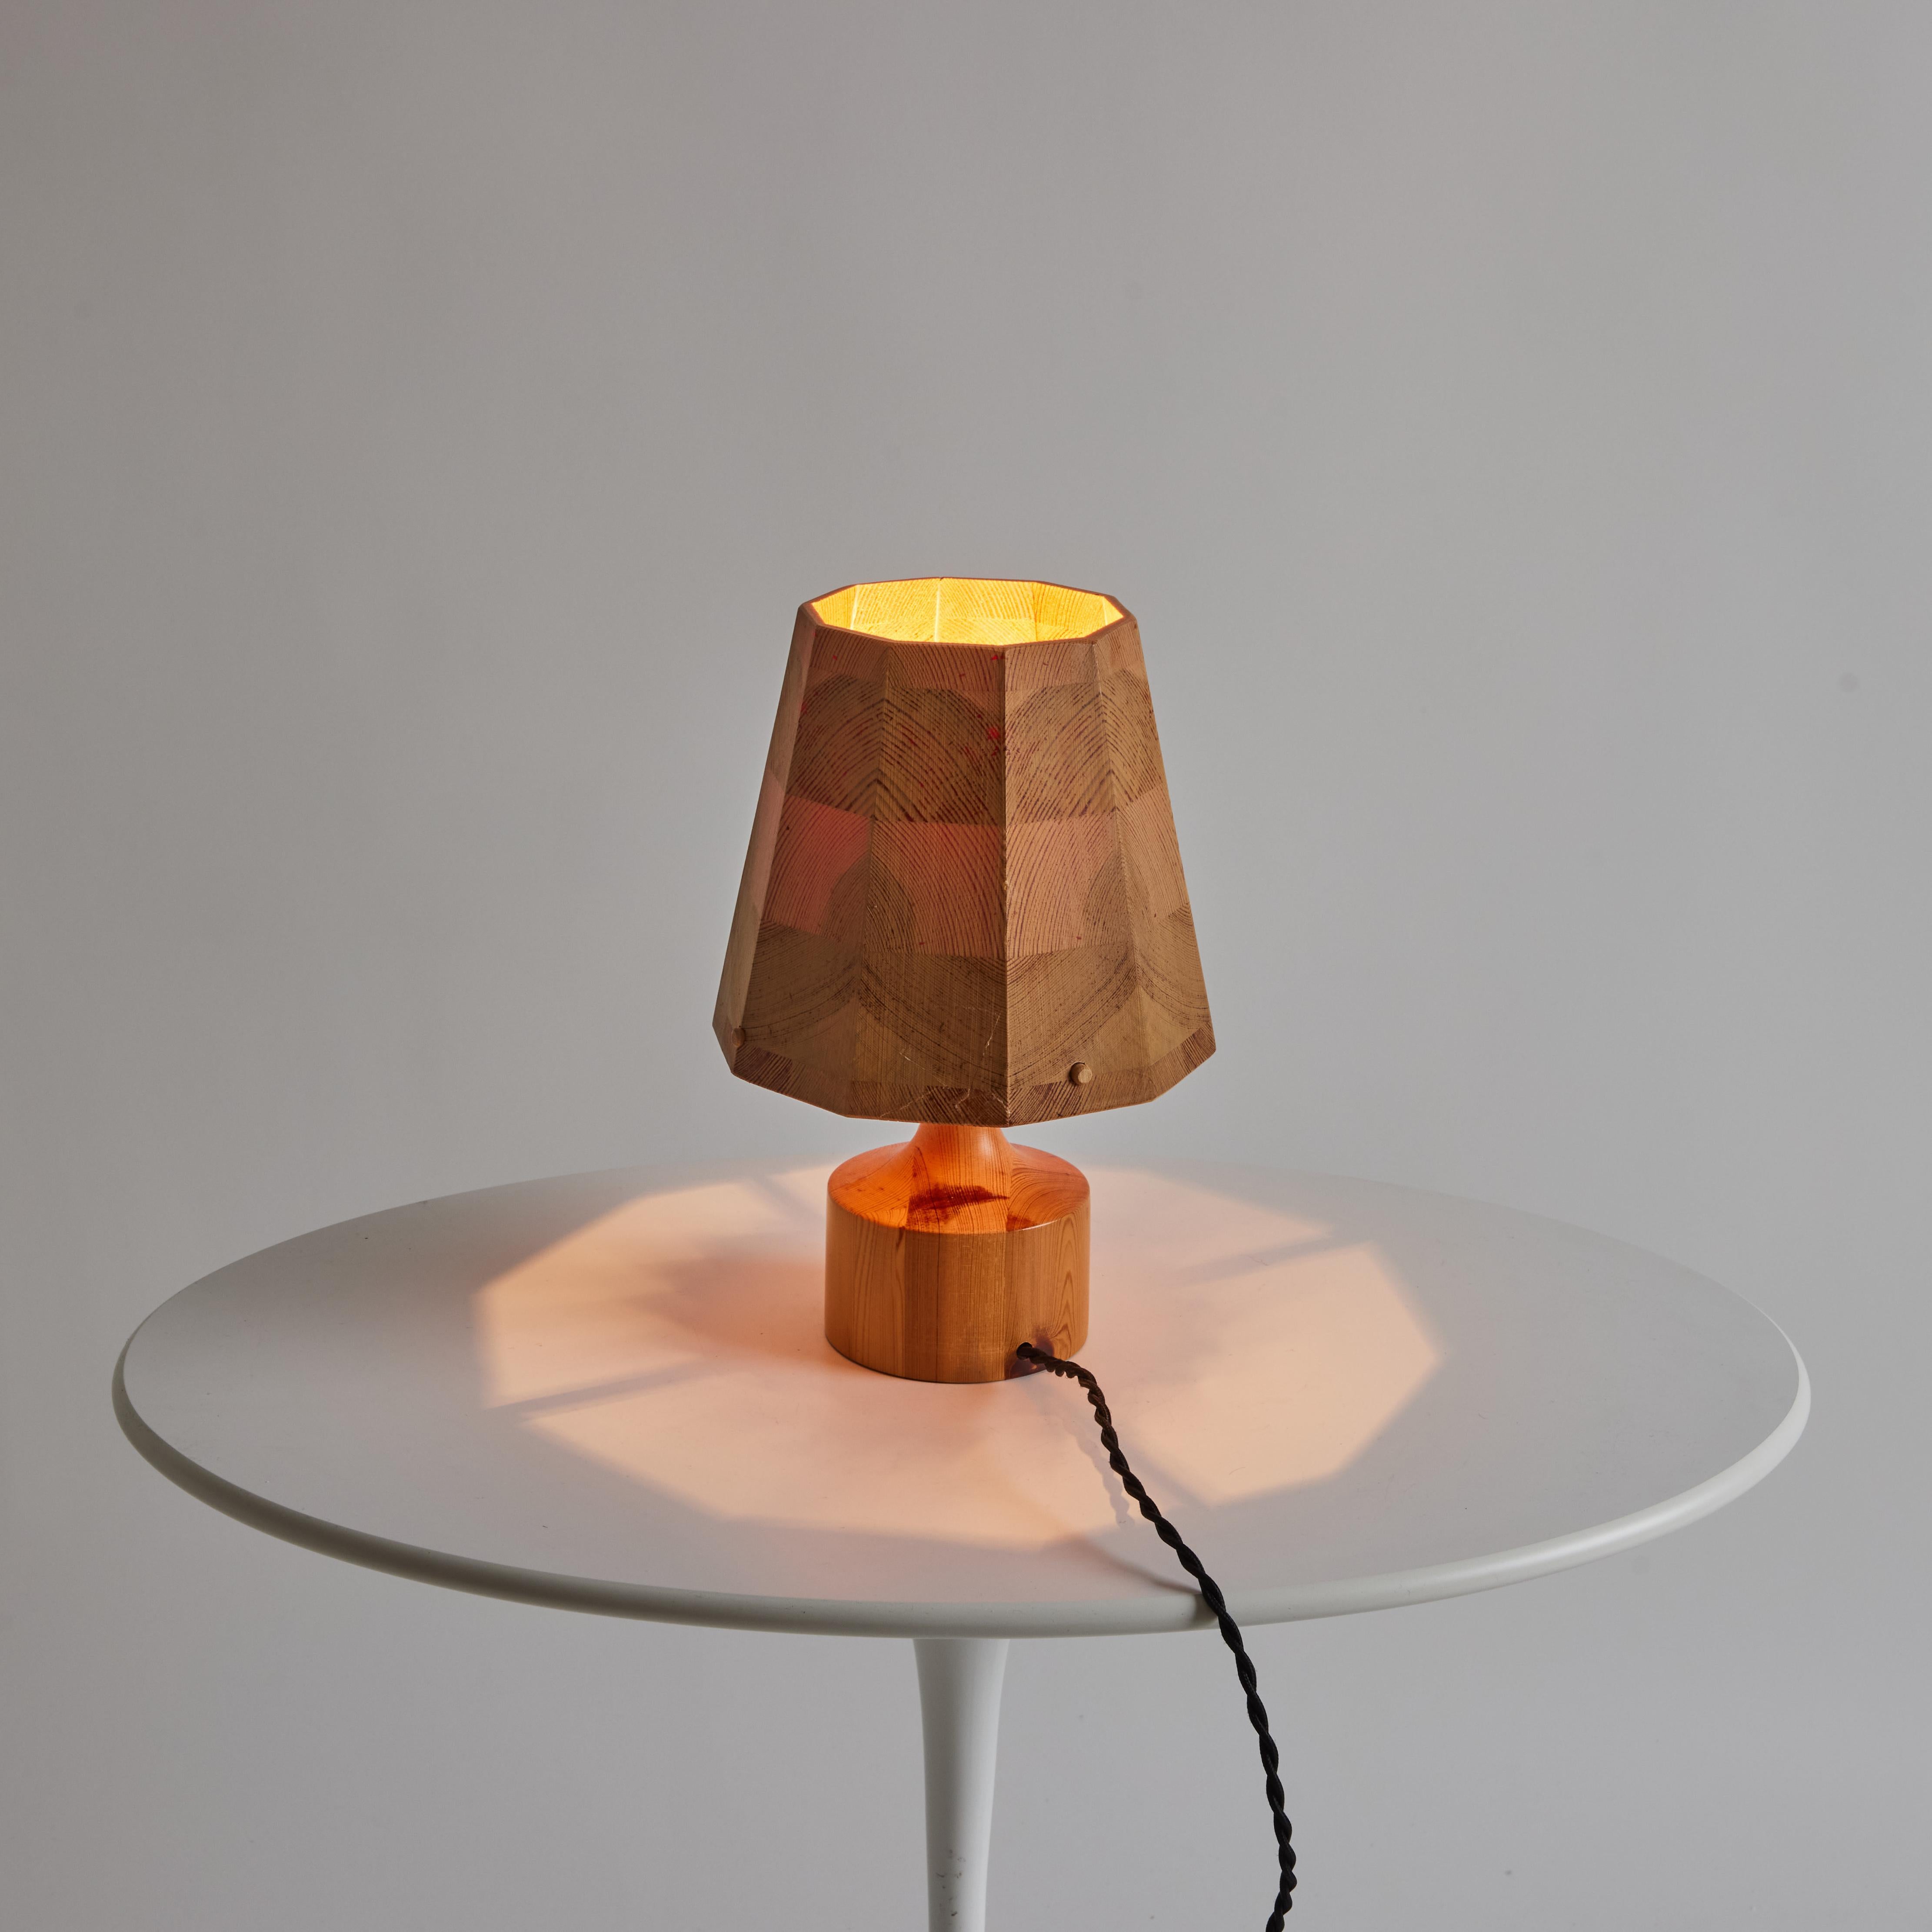 Pair of 1960s Wood Table Lamps Attributed to Hans-Agne Jakobsson for AB Ellysett For Sale 5